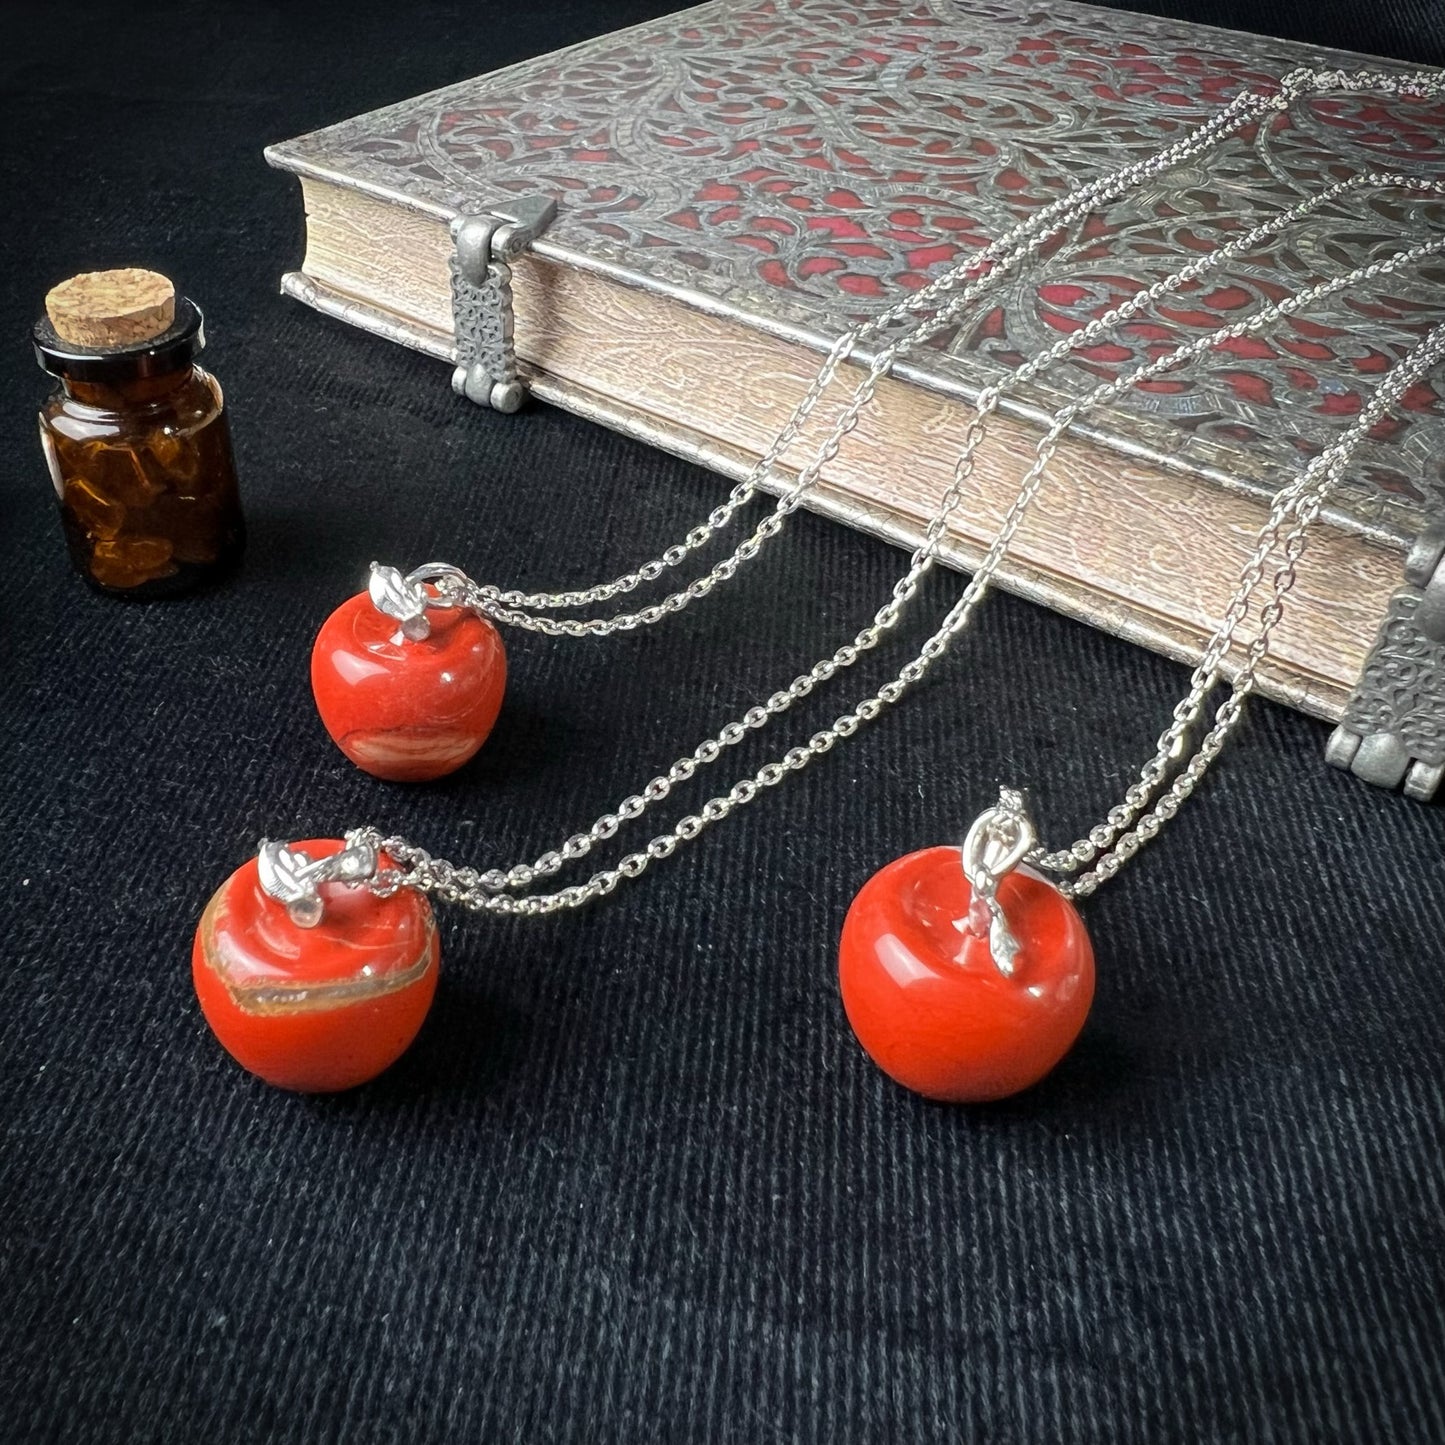 Red jasper apple gemstone necklace - The French Witch shop